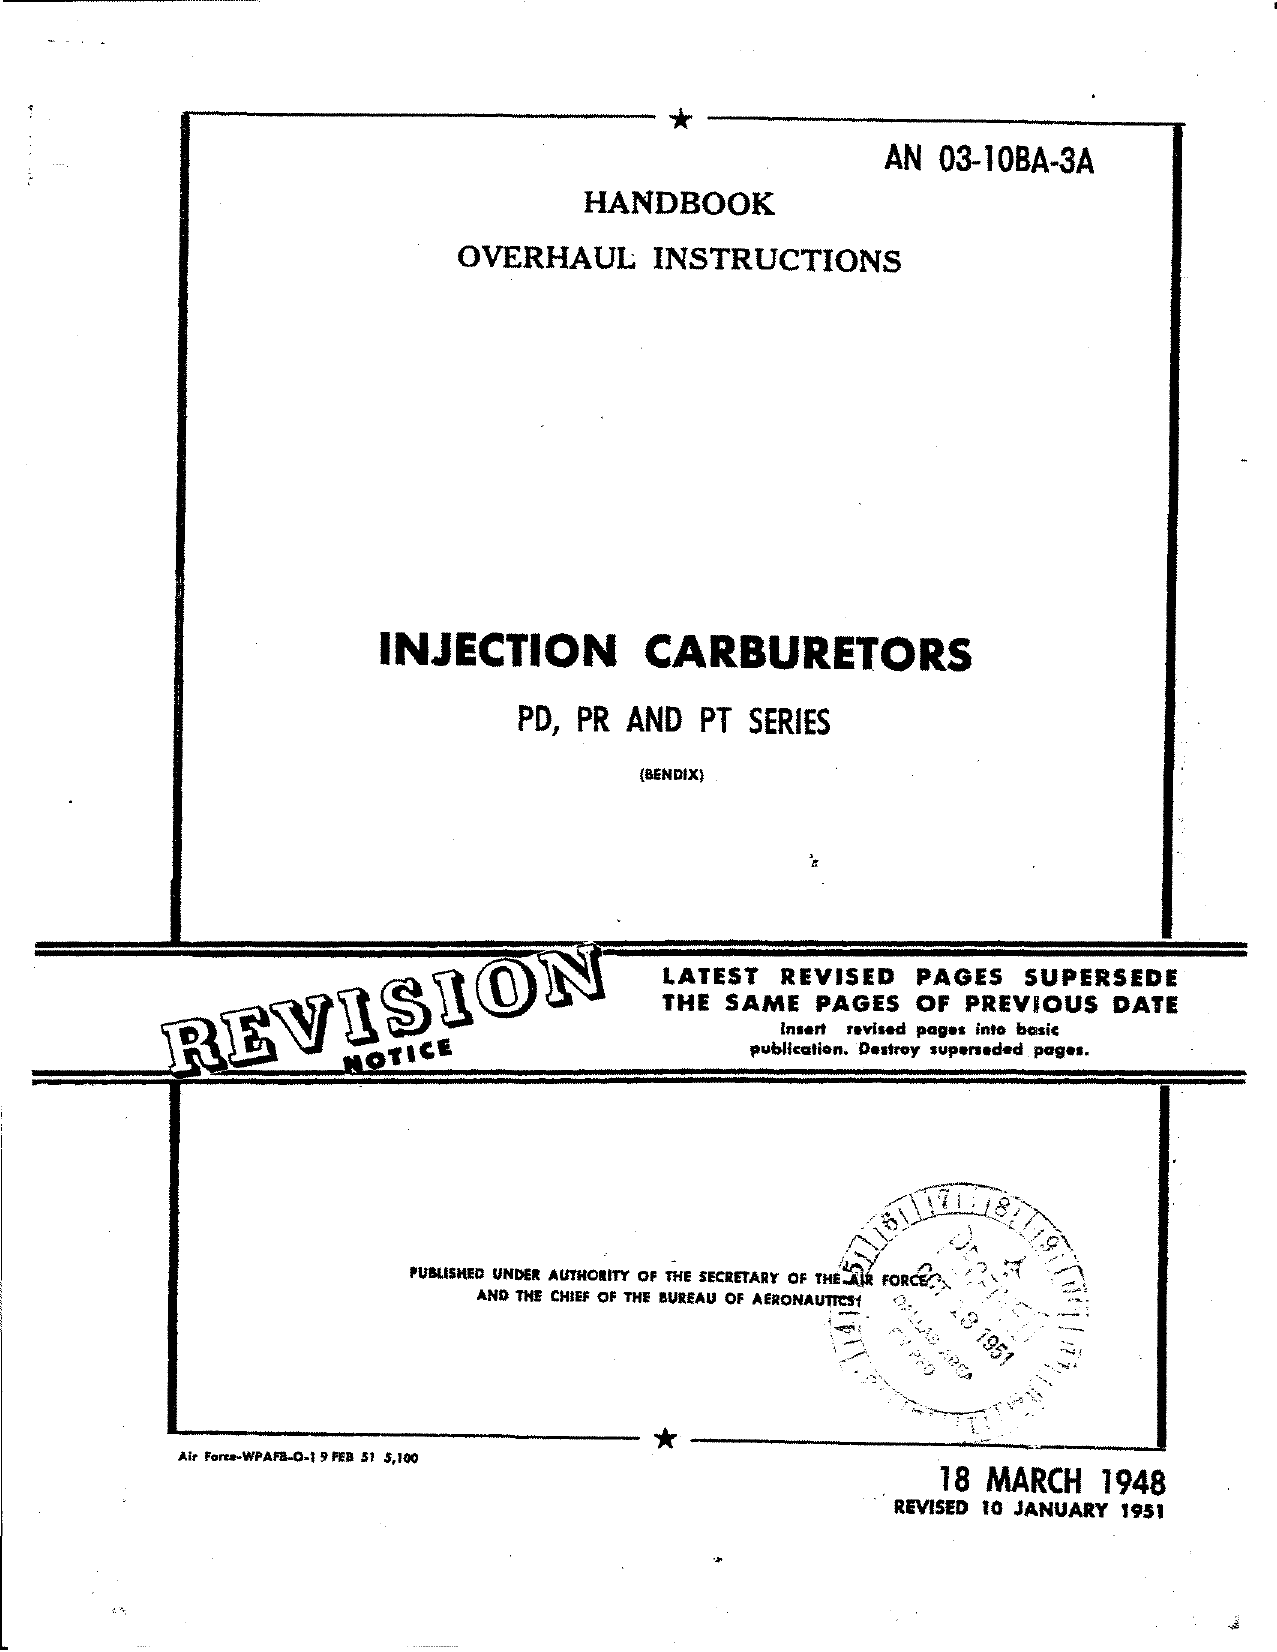 Sample page 1 from AirCorps Library document: Handbook Overhaul Instructions for Injection Carburetors